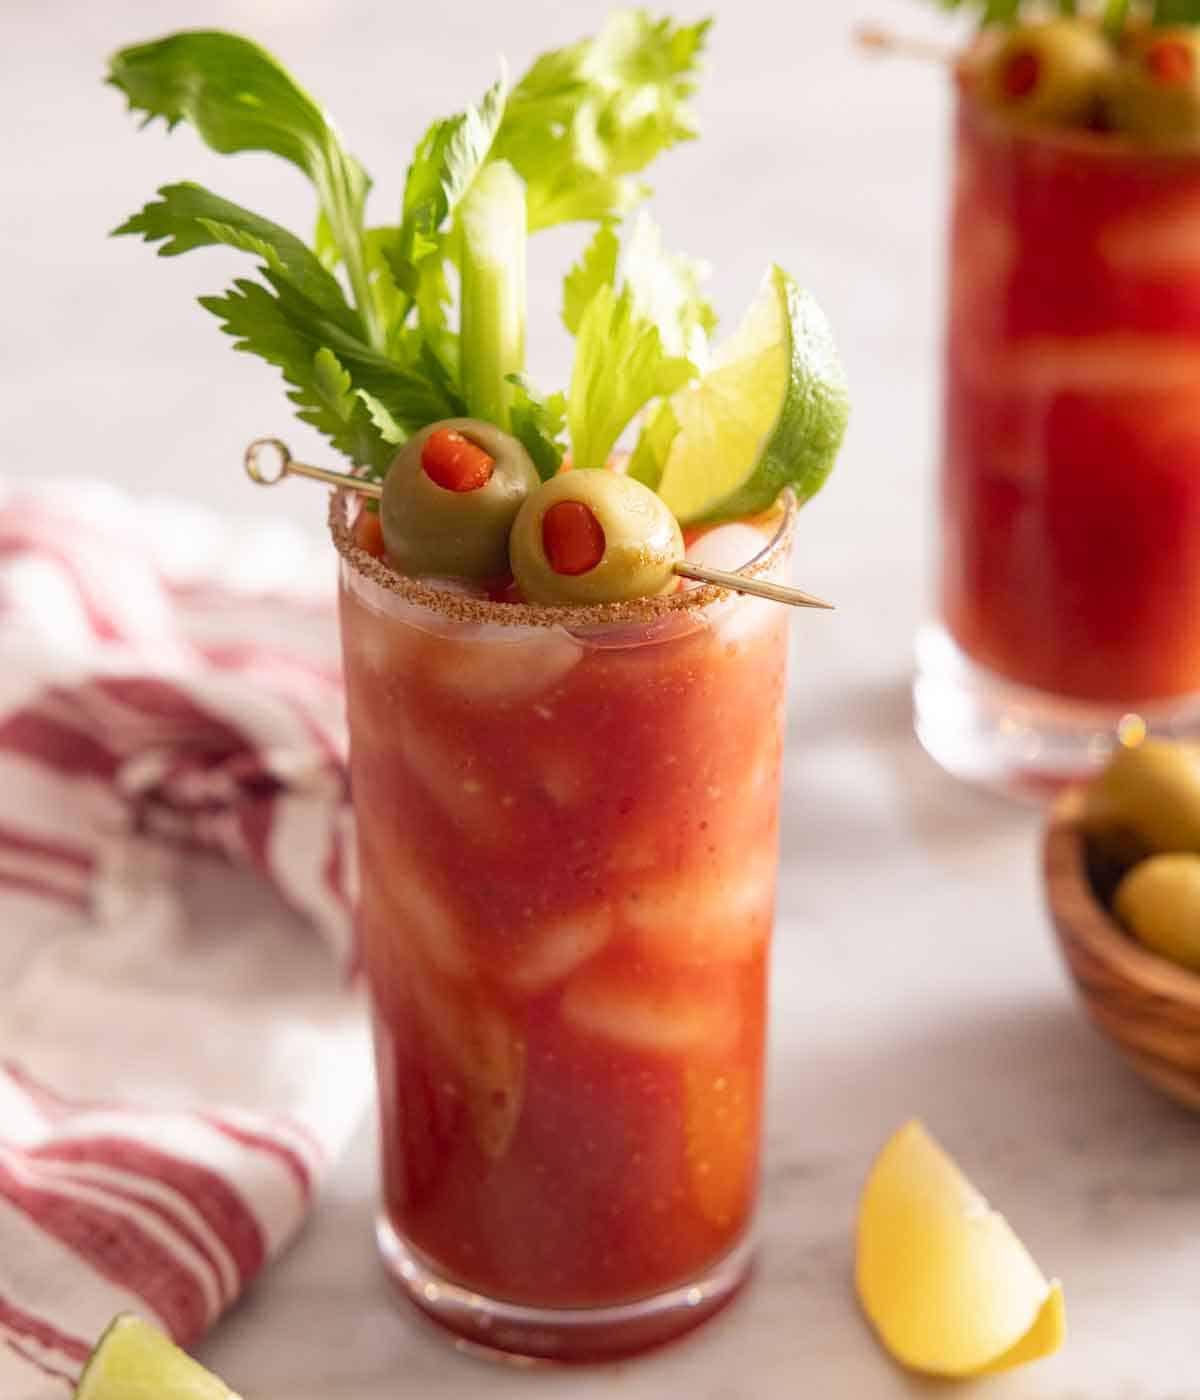 A glass of Bloody Mary with two olives, lime wedge, and celery as garnish.